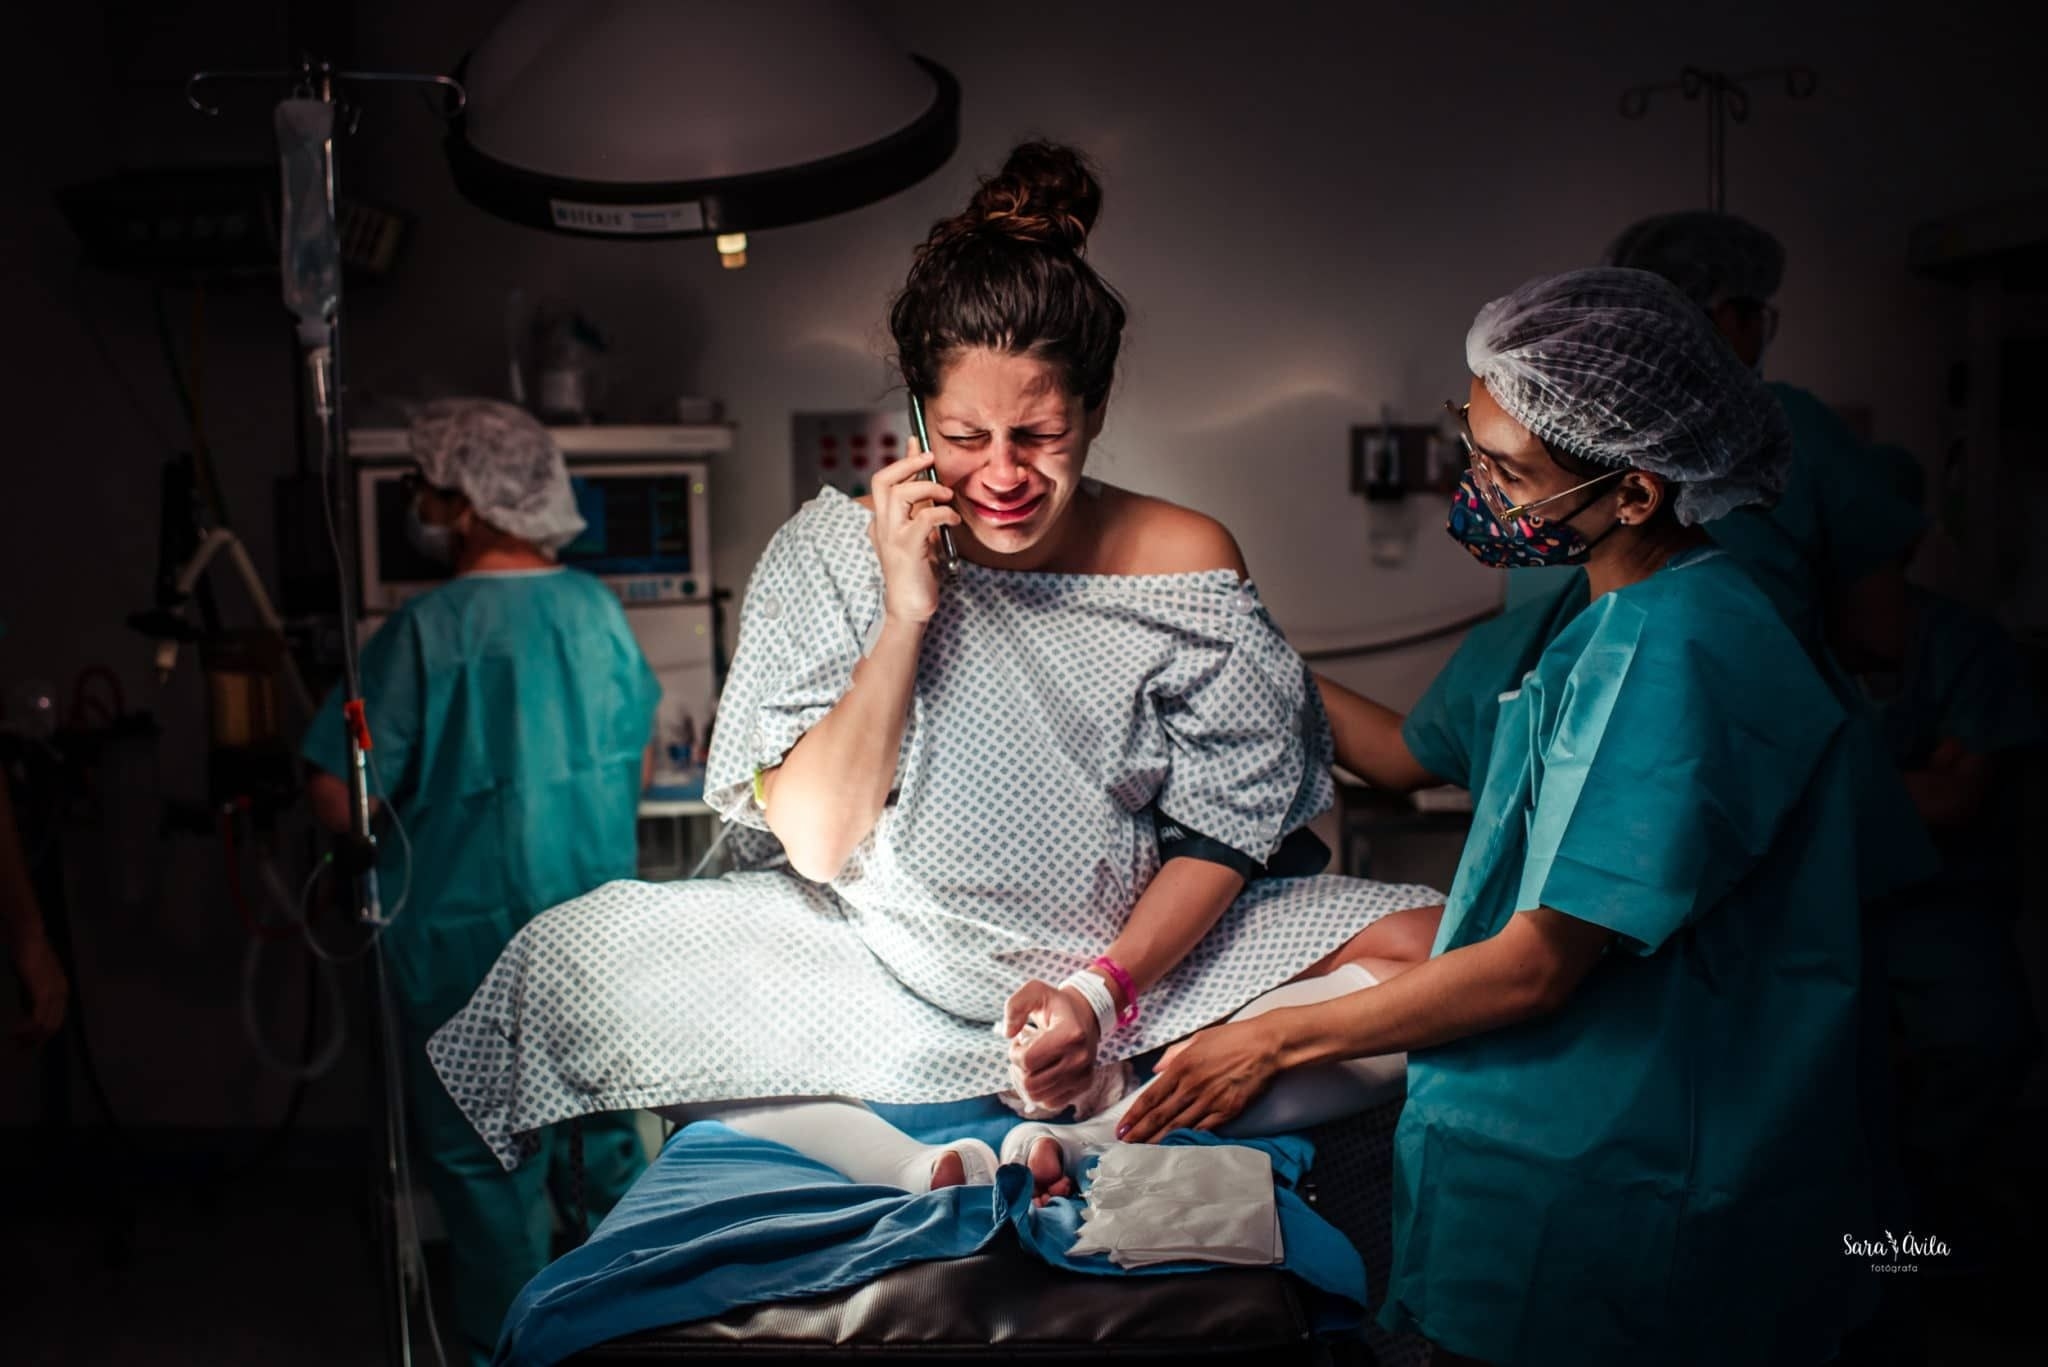 A woman in a hospital gown cries on the phone